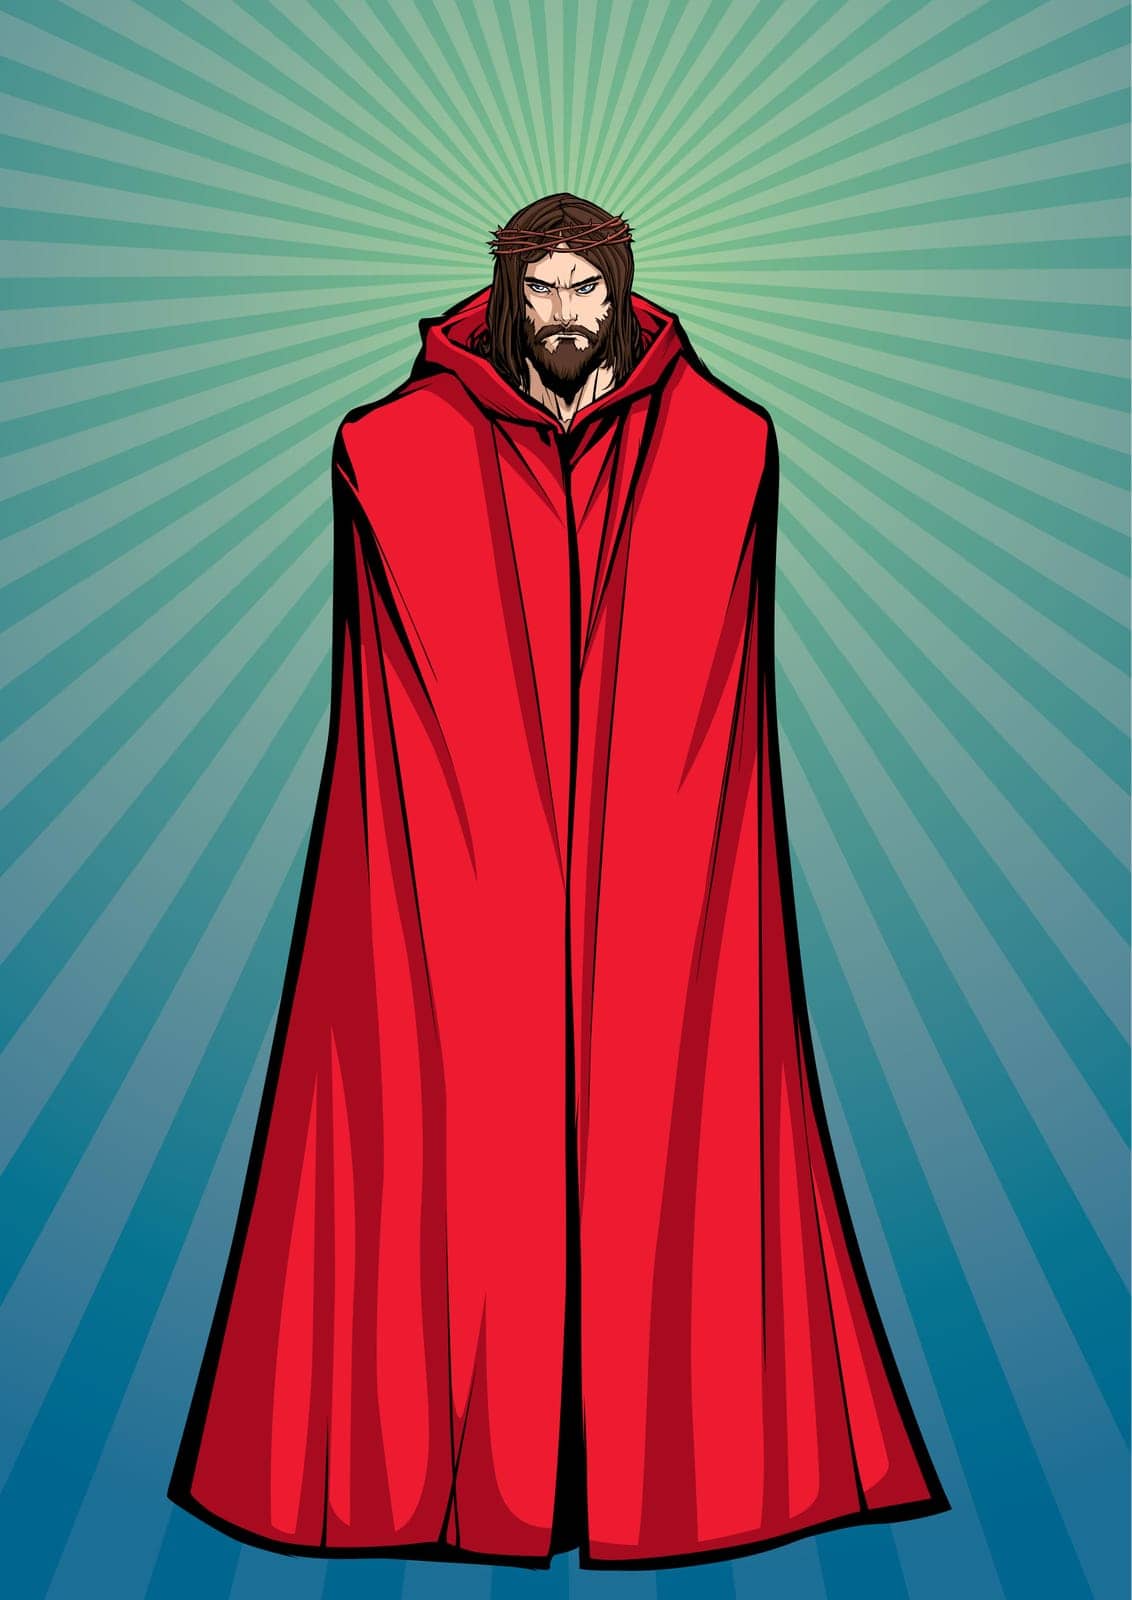 Full length illustration of Jesus Christ wearing red cloak and looking at you with serious expression.

